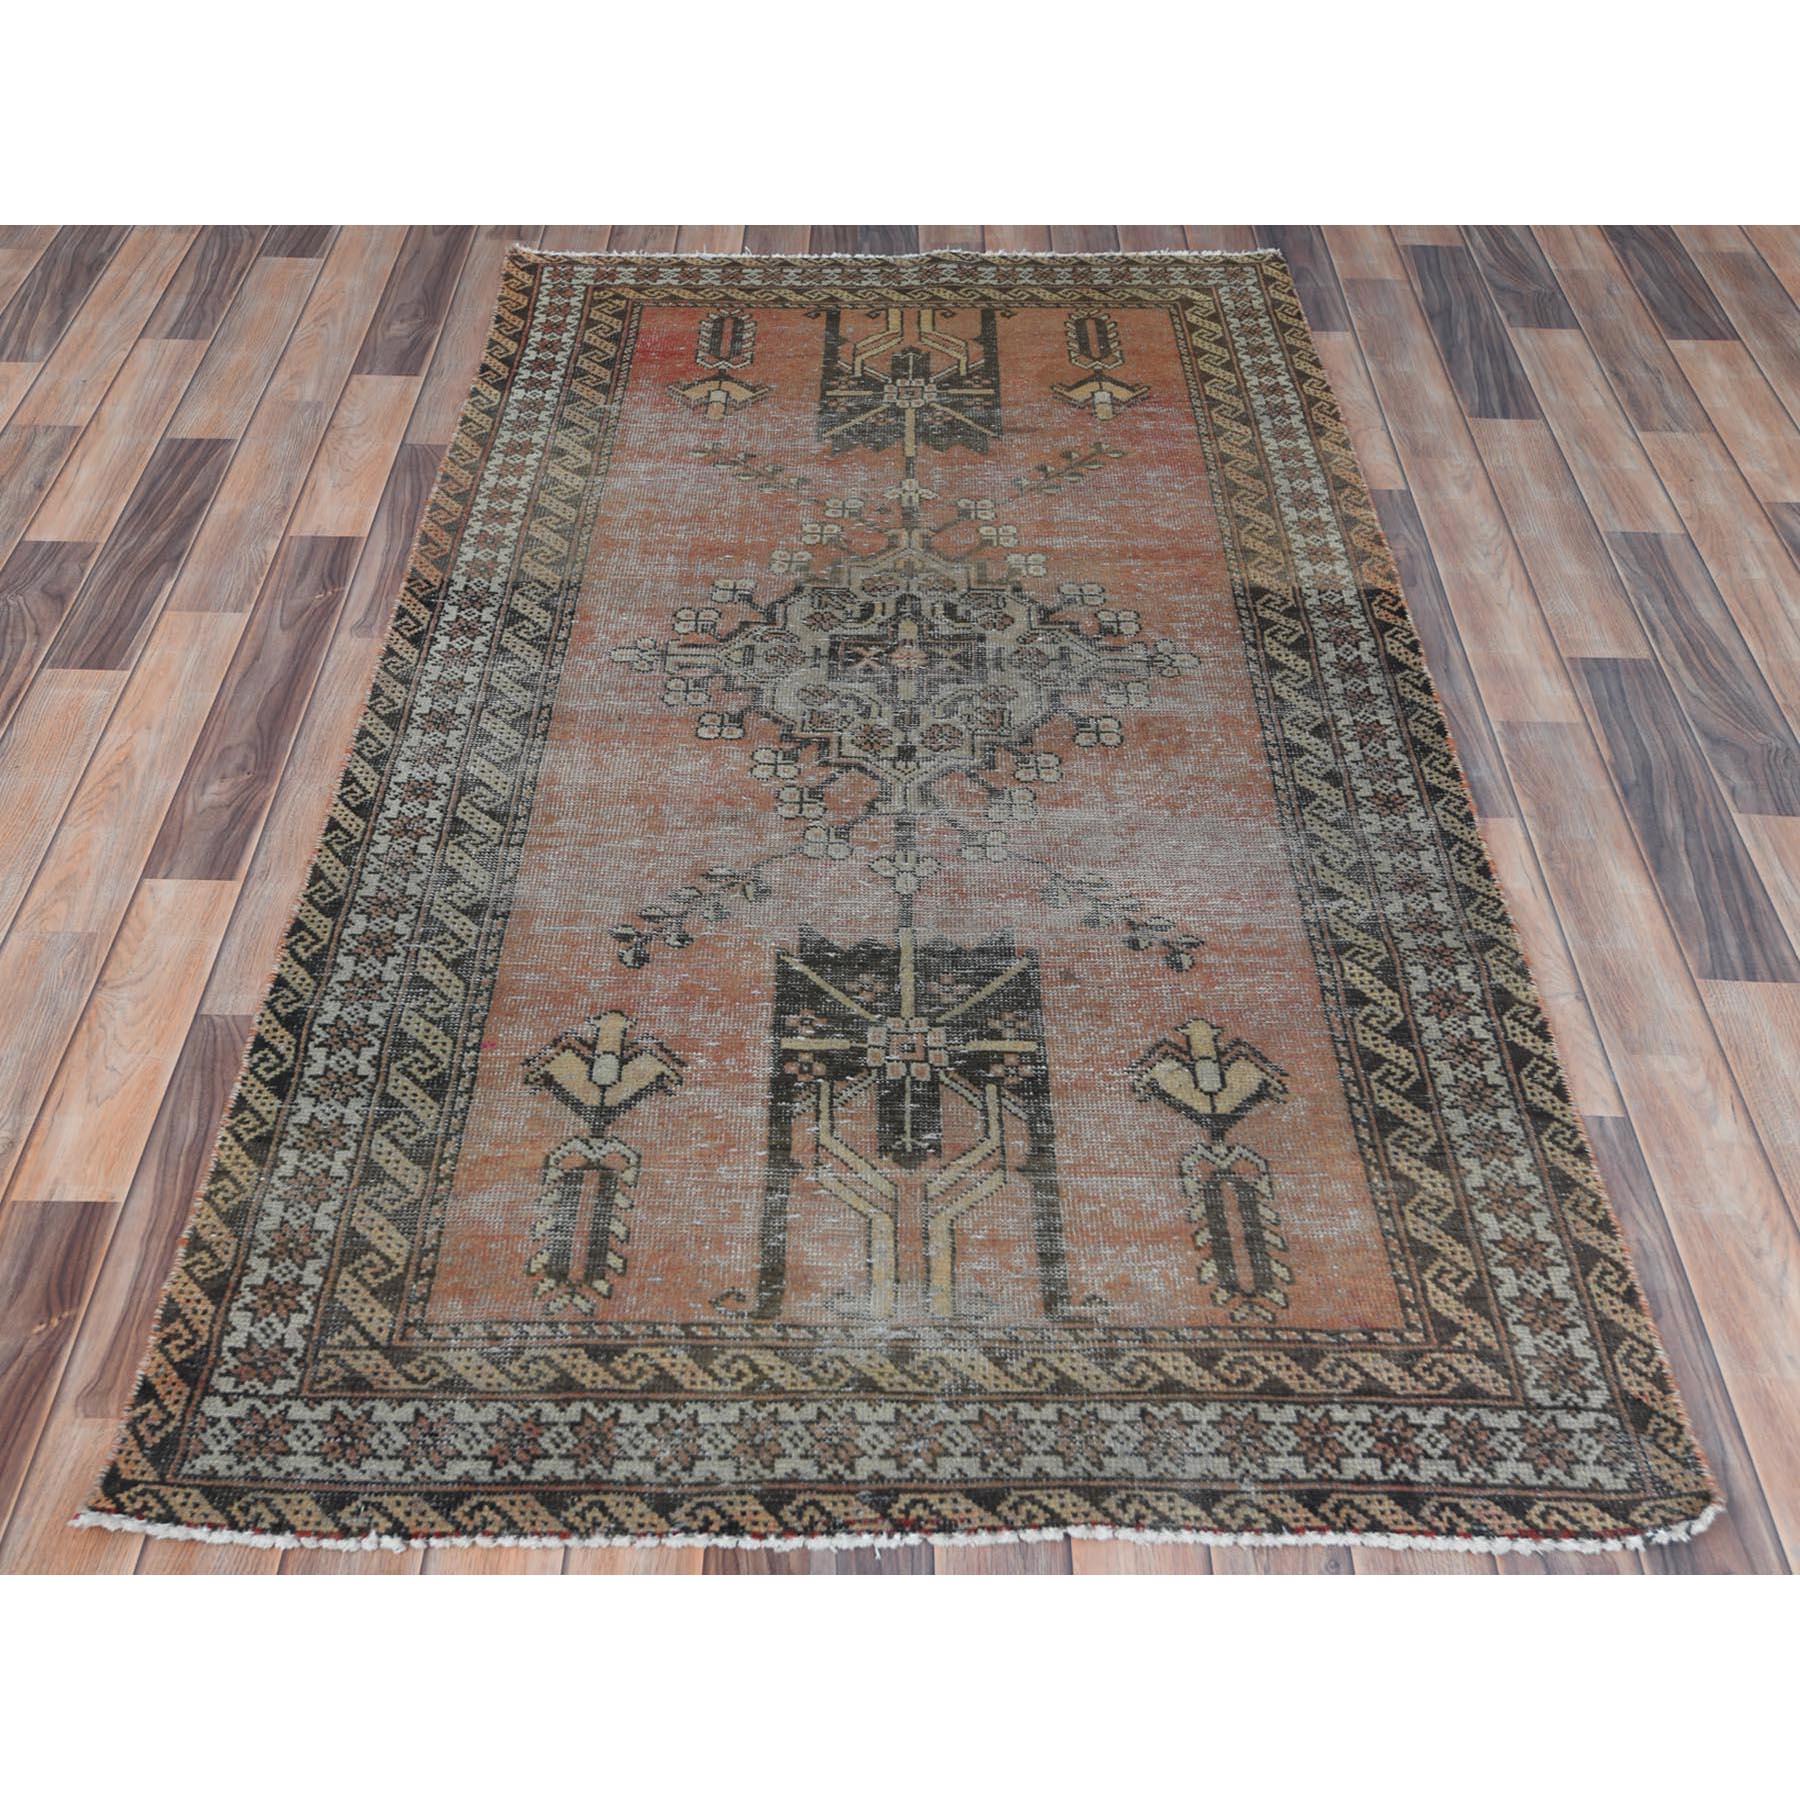 This fabulous Hand-Knotted carpet has been created and designed for extra strength and durability. This rug has been handcrafted for weeks in the traditional method that is used to make
Exact rug size in feet and inches : 3'7